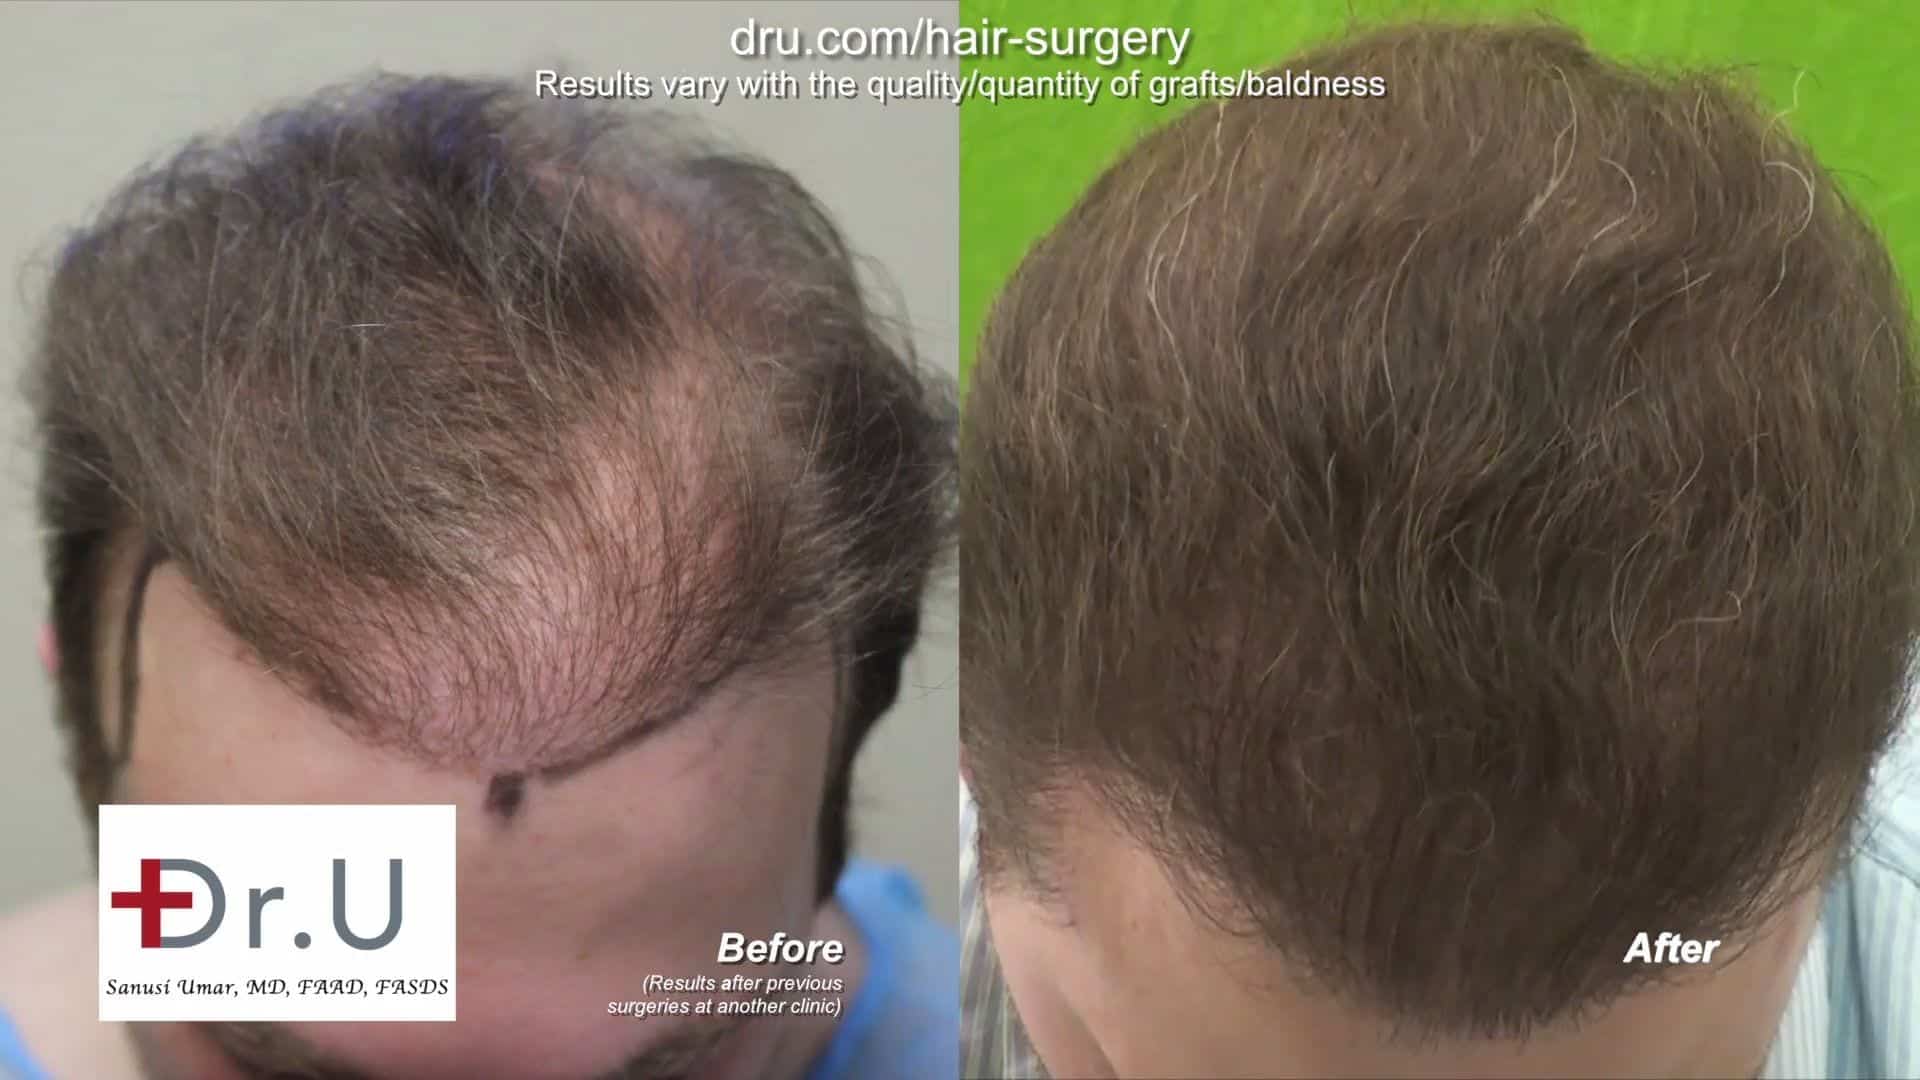 DrUGraft body hair FUE Restores donor depleted bald patient: Patient after treatment from Dr. Umar